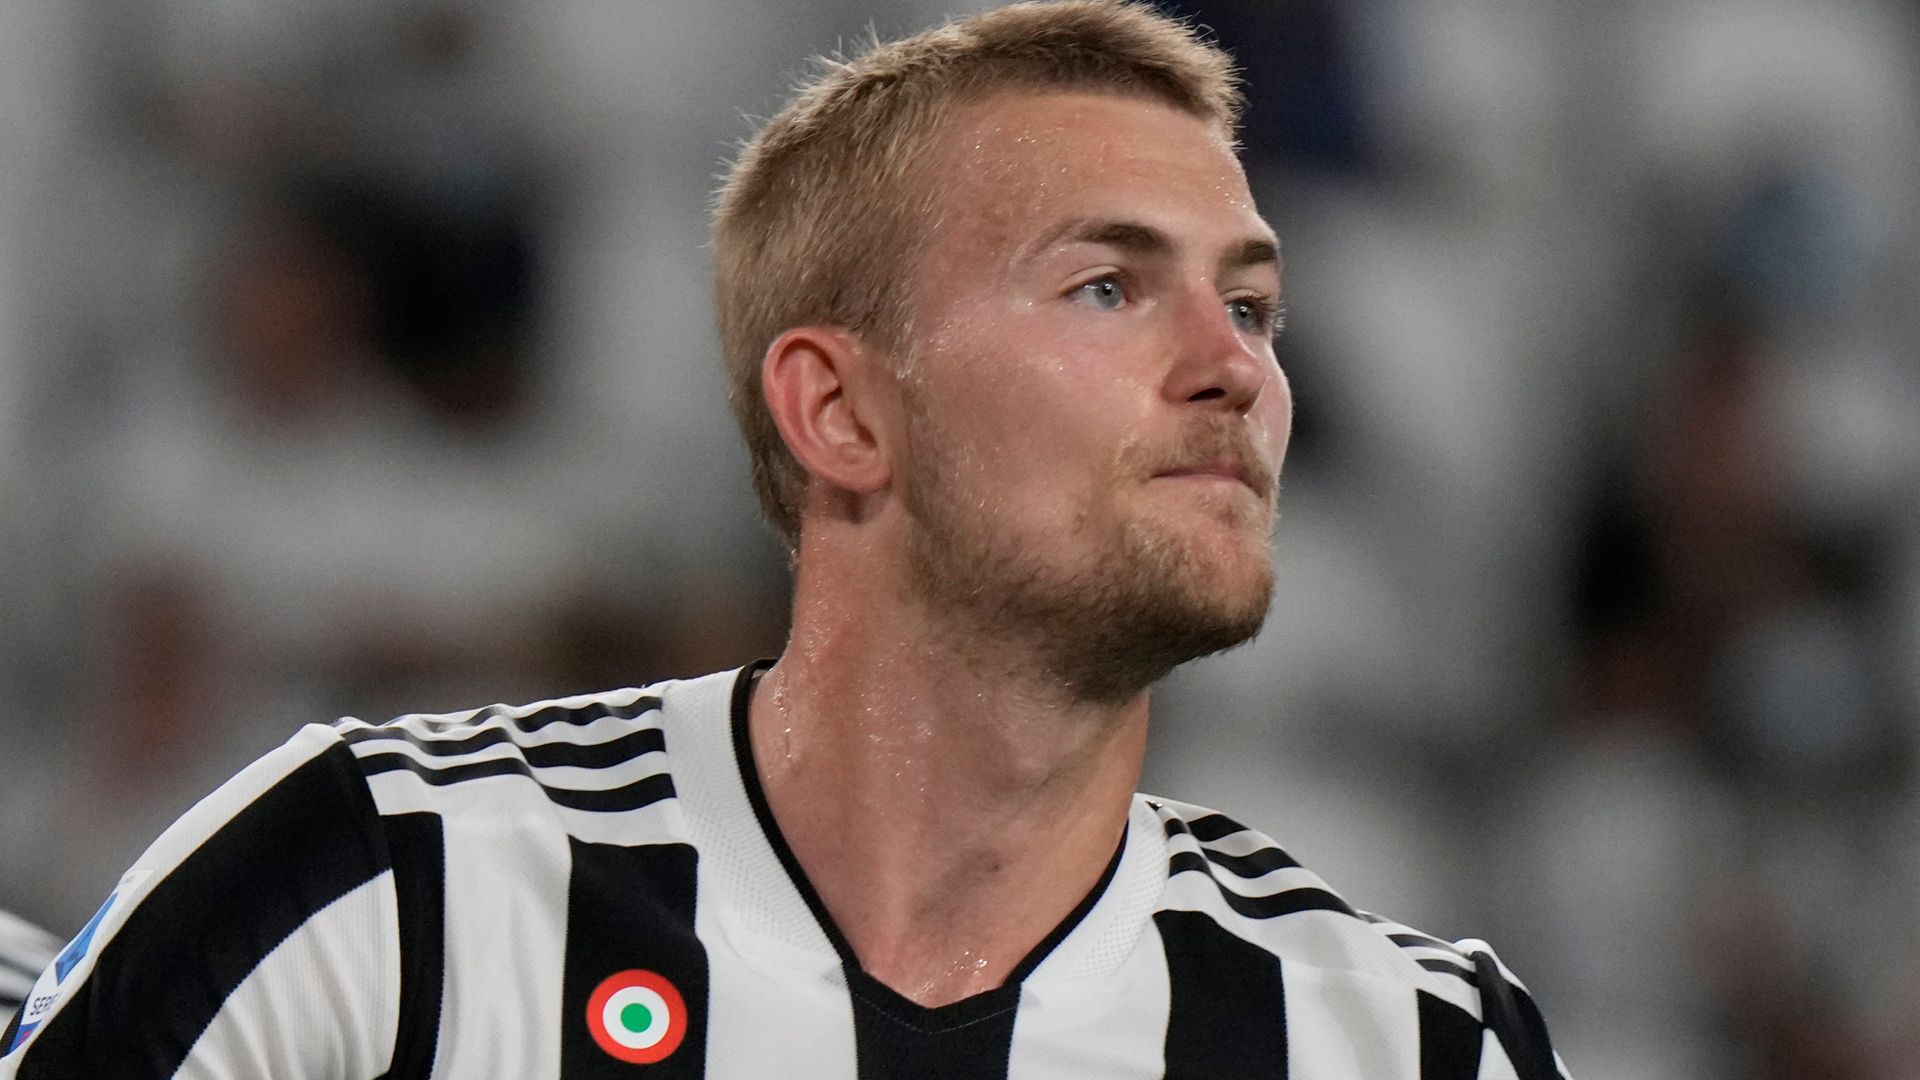 De Ligt to join Bayern from Juventus for £68m